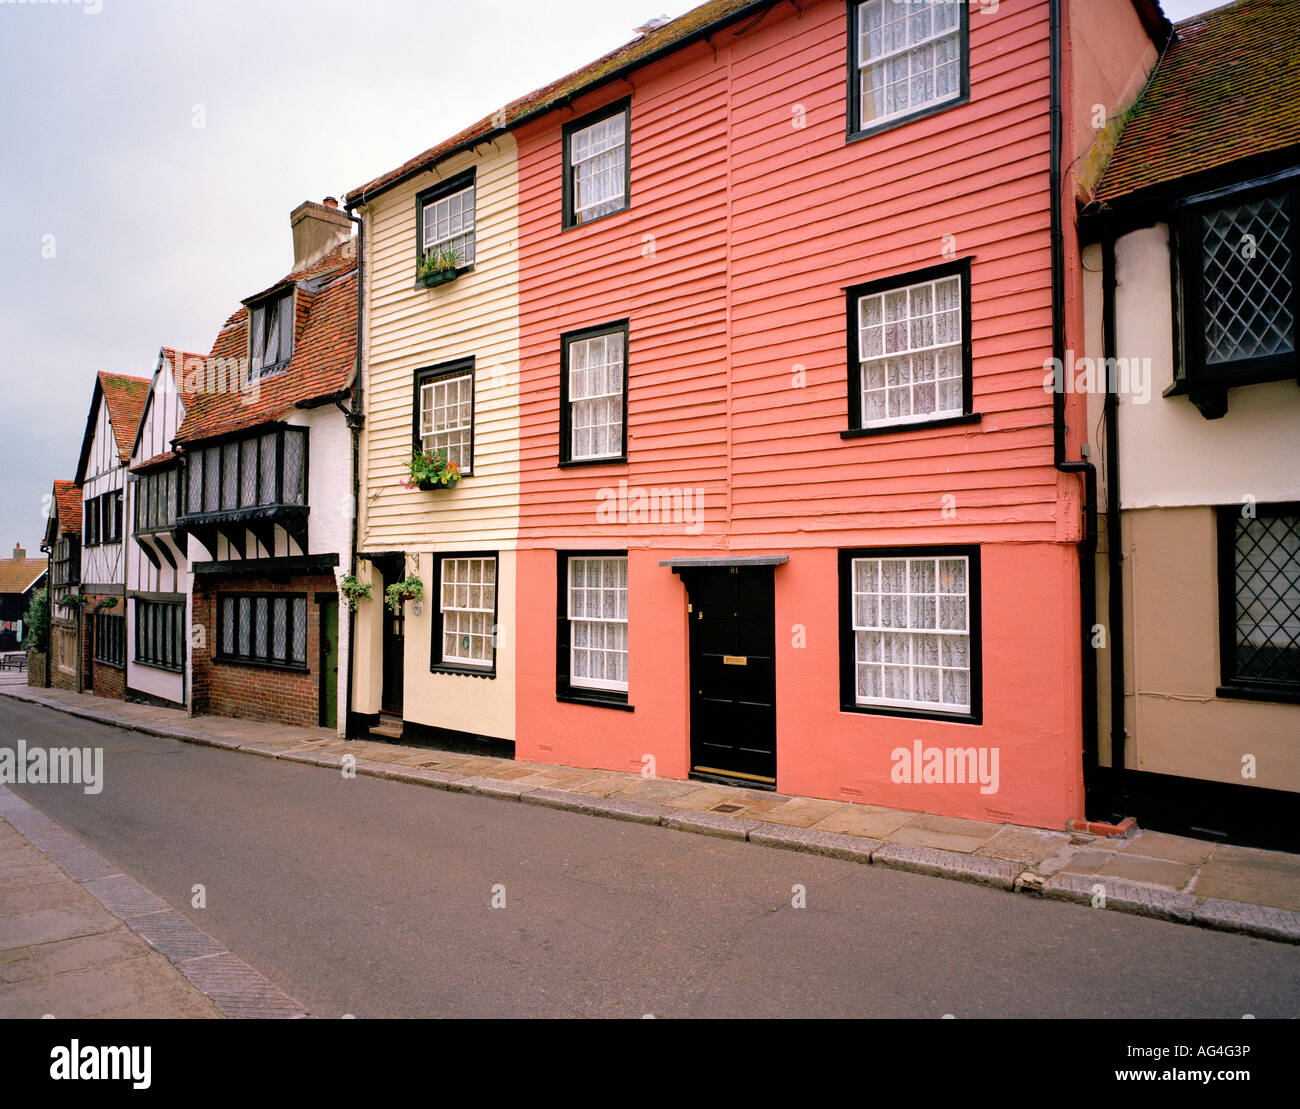 Row of old Tudor style houses in the old town, Hastings, East Sussex, England, UK. Stock Photo